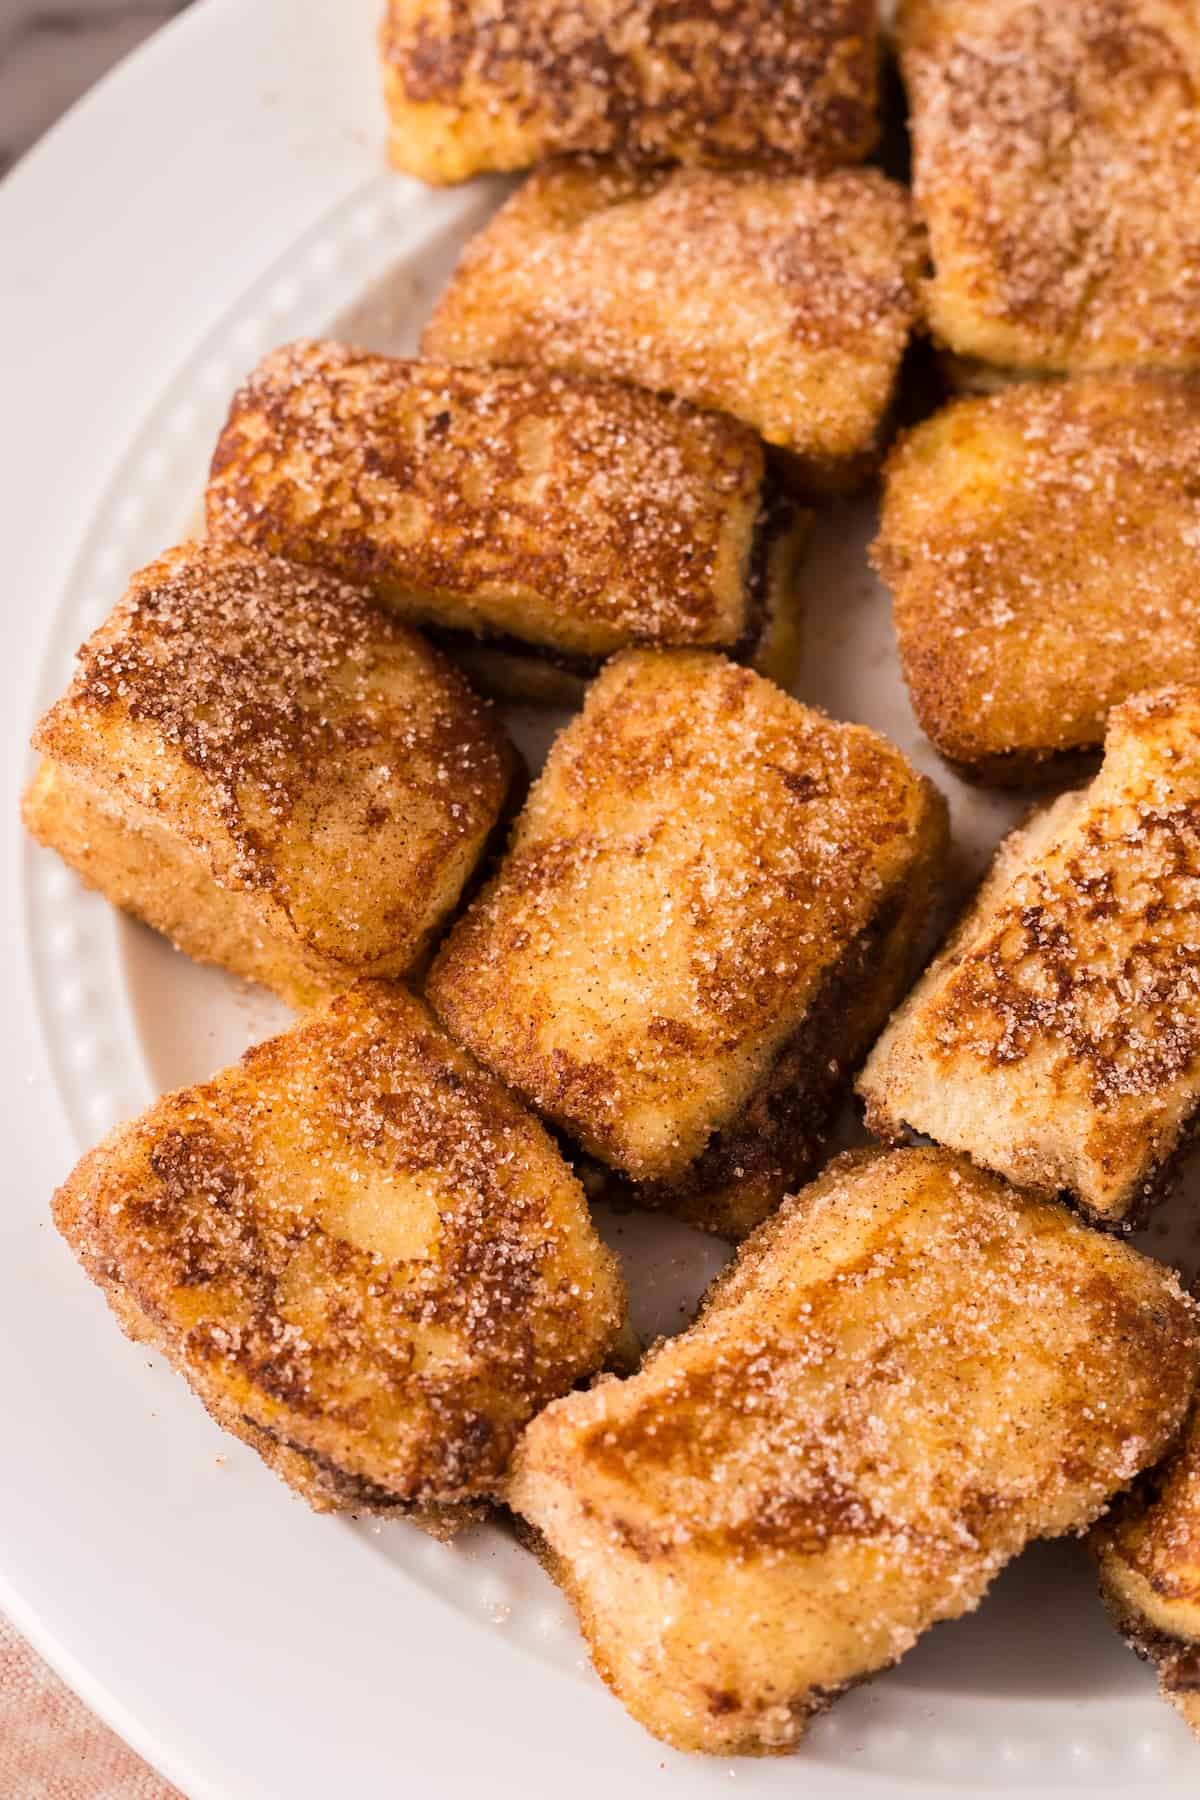 Stuffed French toast bites on a plate.